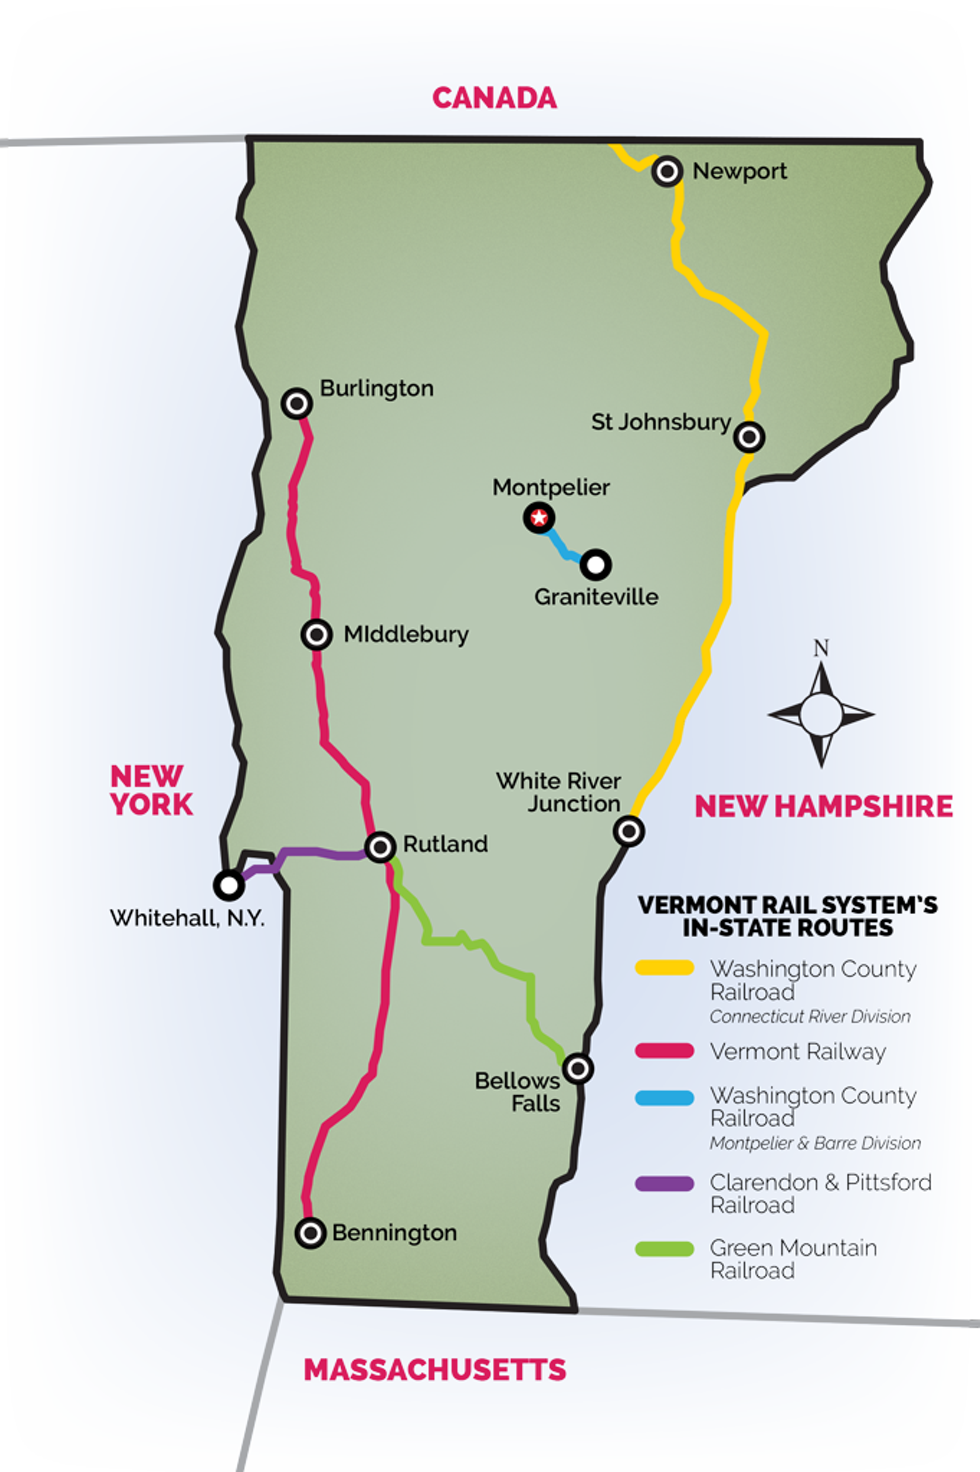 Vermont Rail System's in-state routes - GRAPHIC: JOHN JAMES ©️ SEVEN DAYS